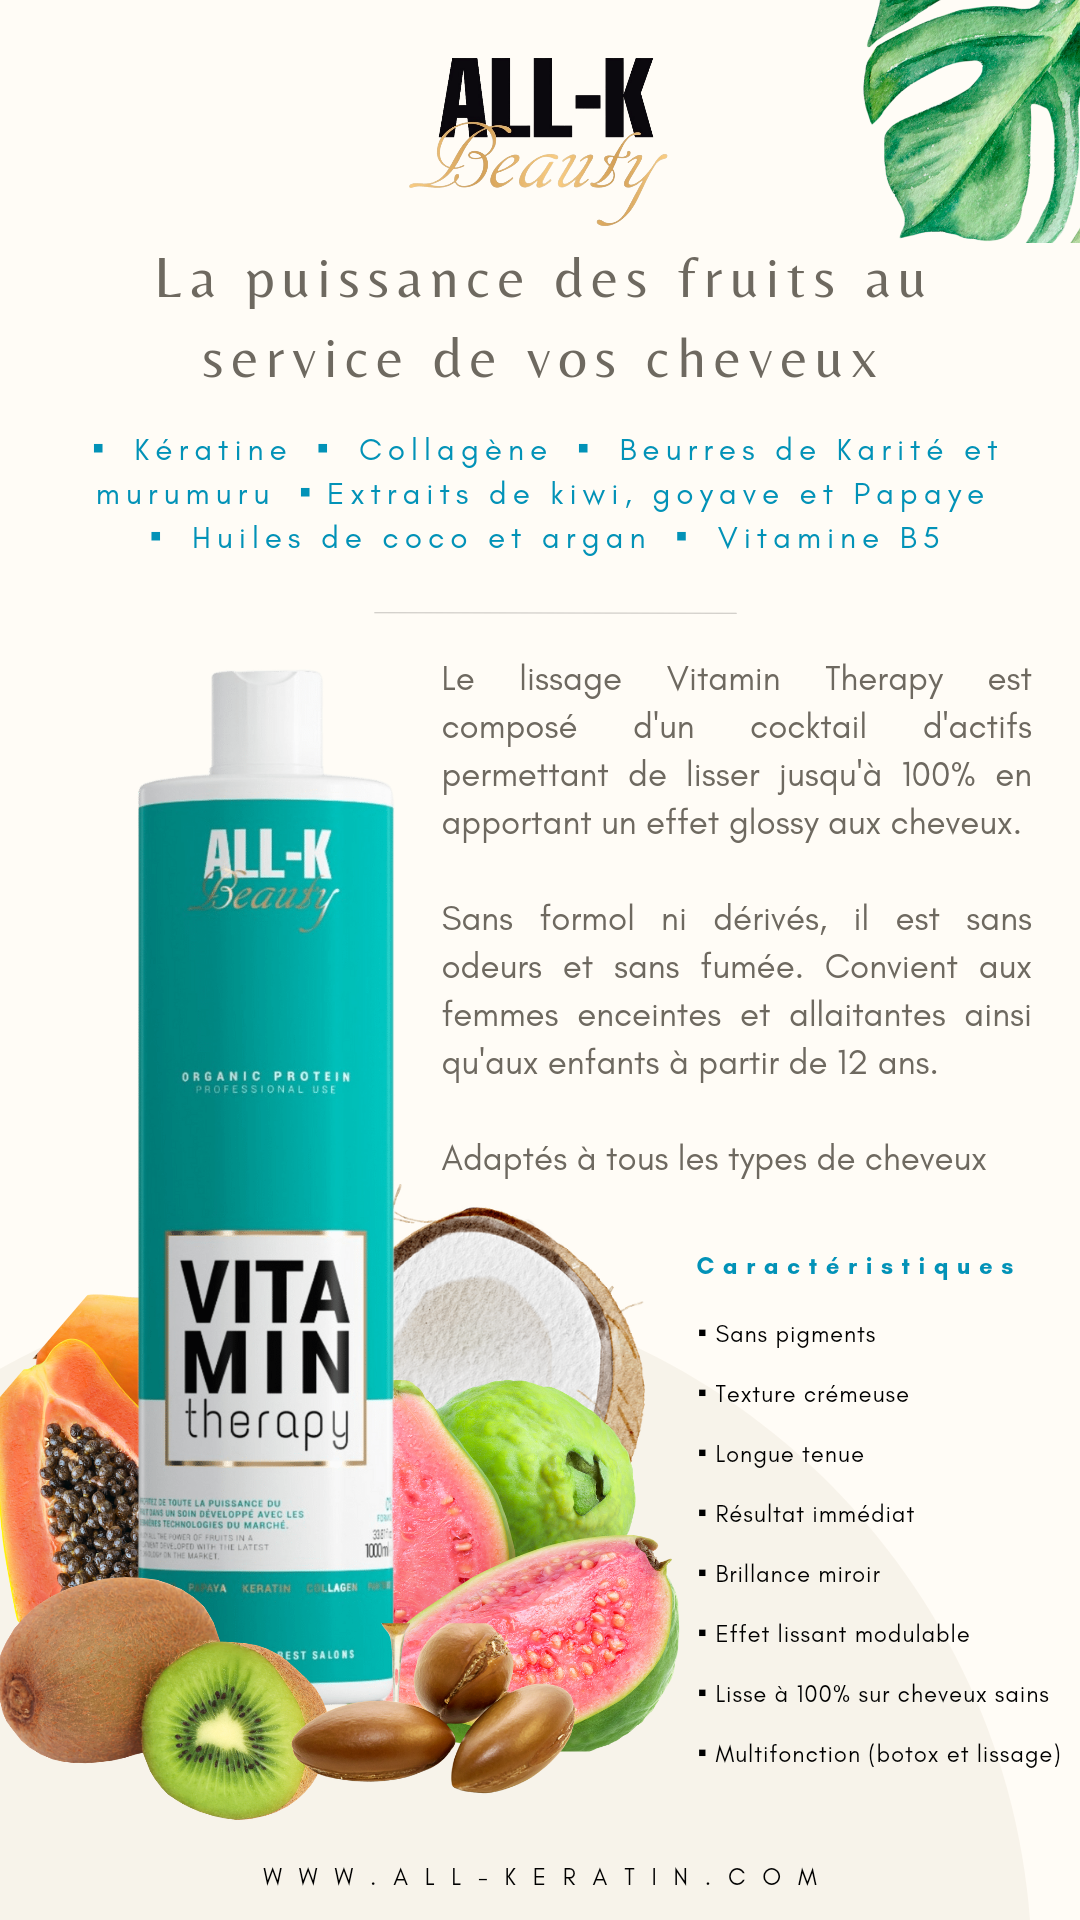 Vitamin Therapy - Lissage - All-K Beauty